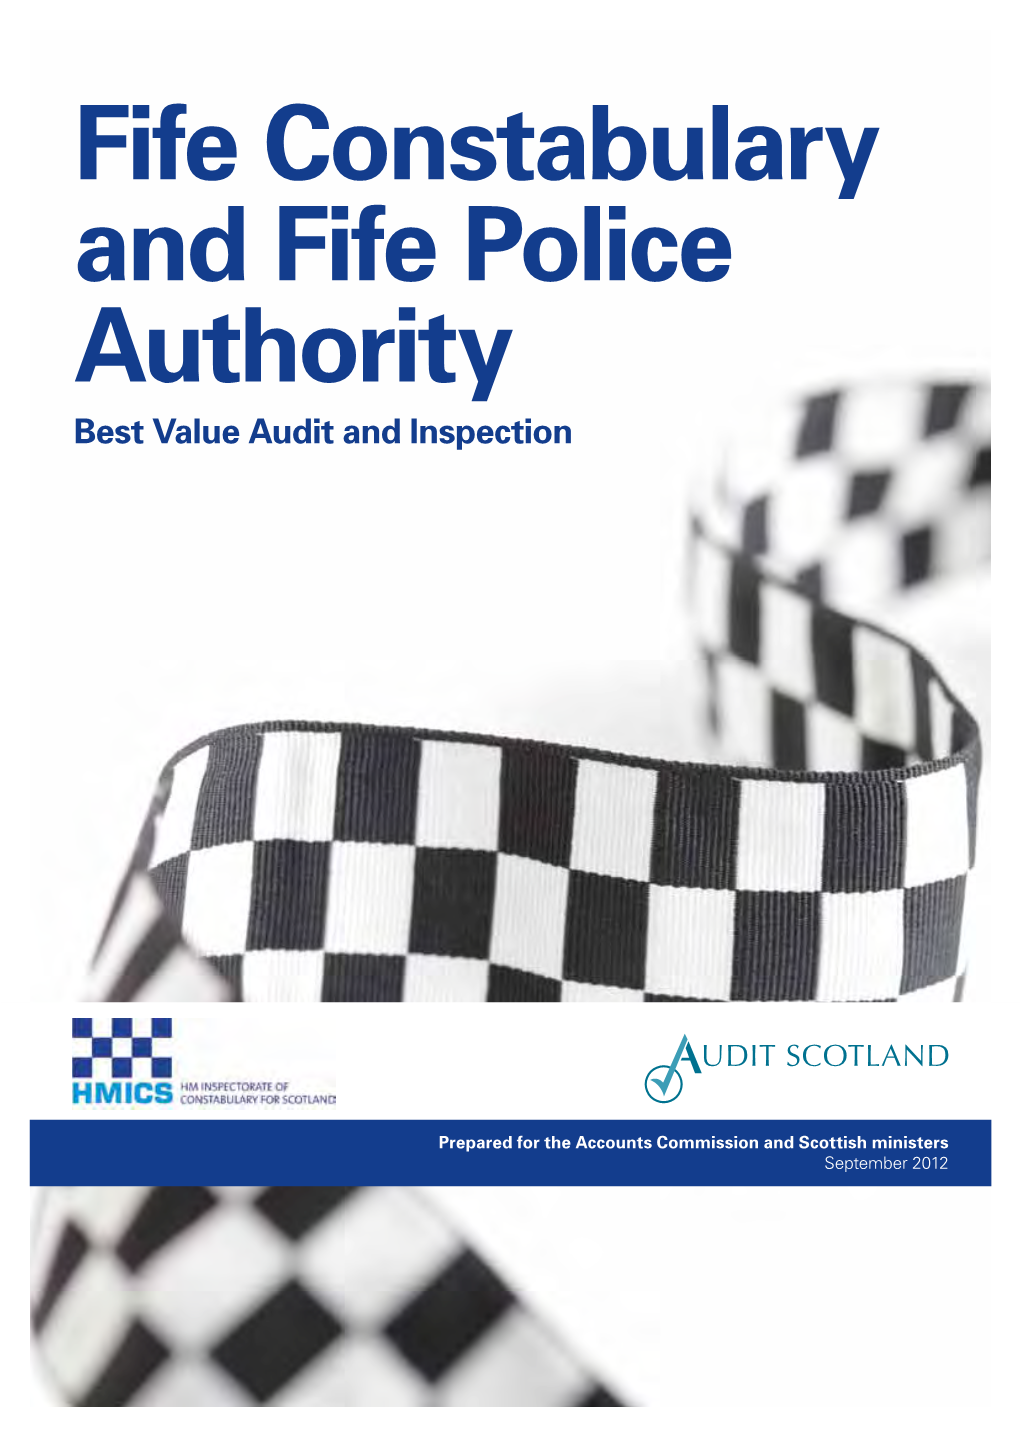 Fife Constabulary and Fife Police Authority Best Value Audit and Inspection